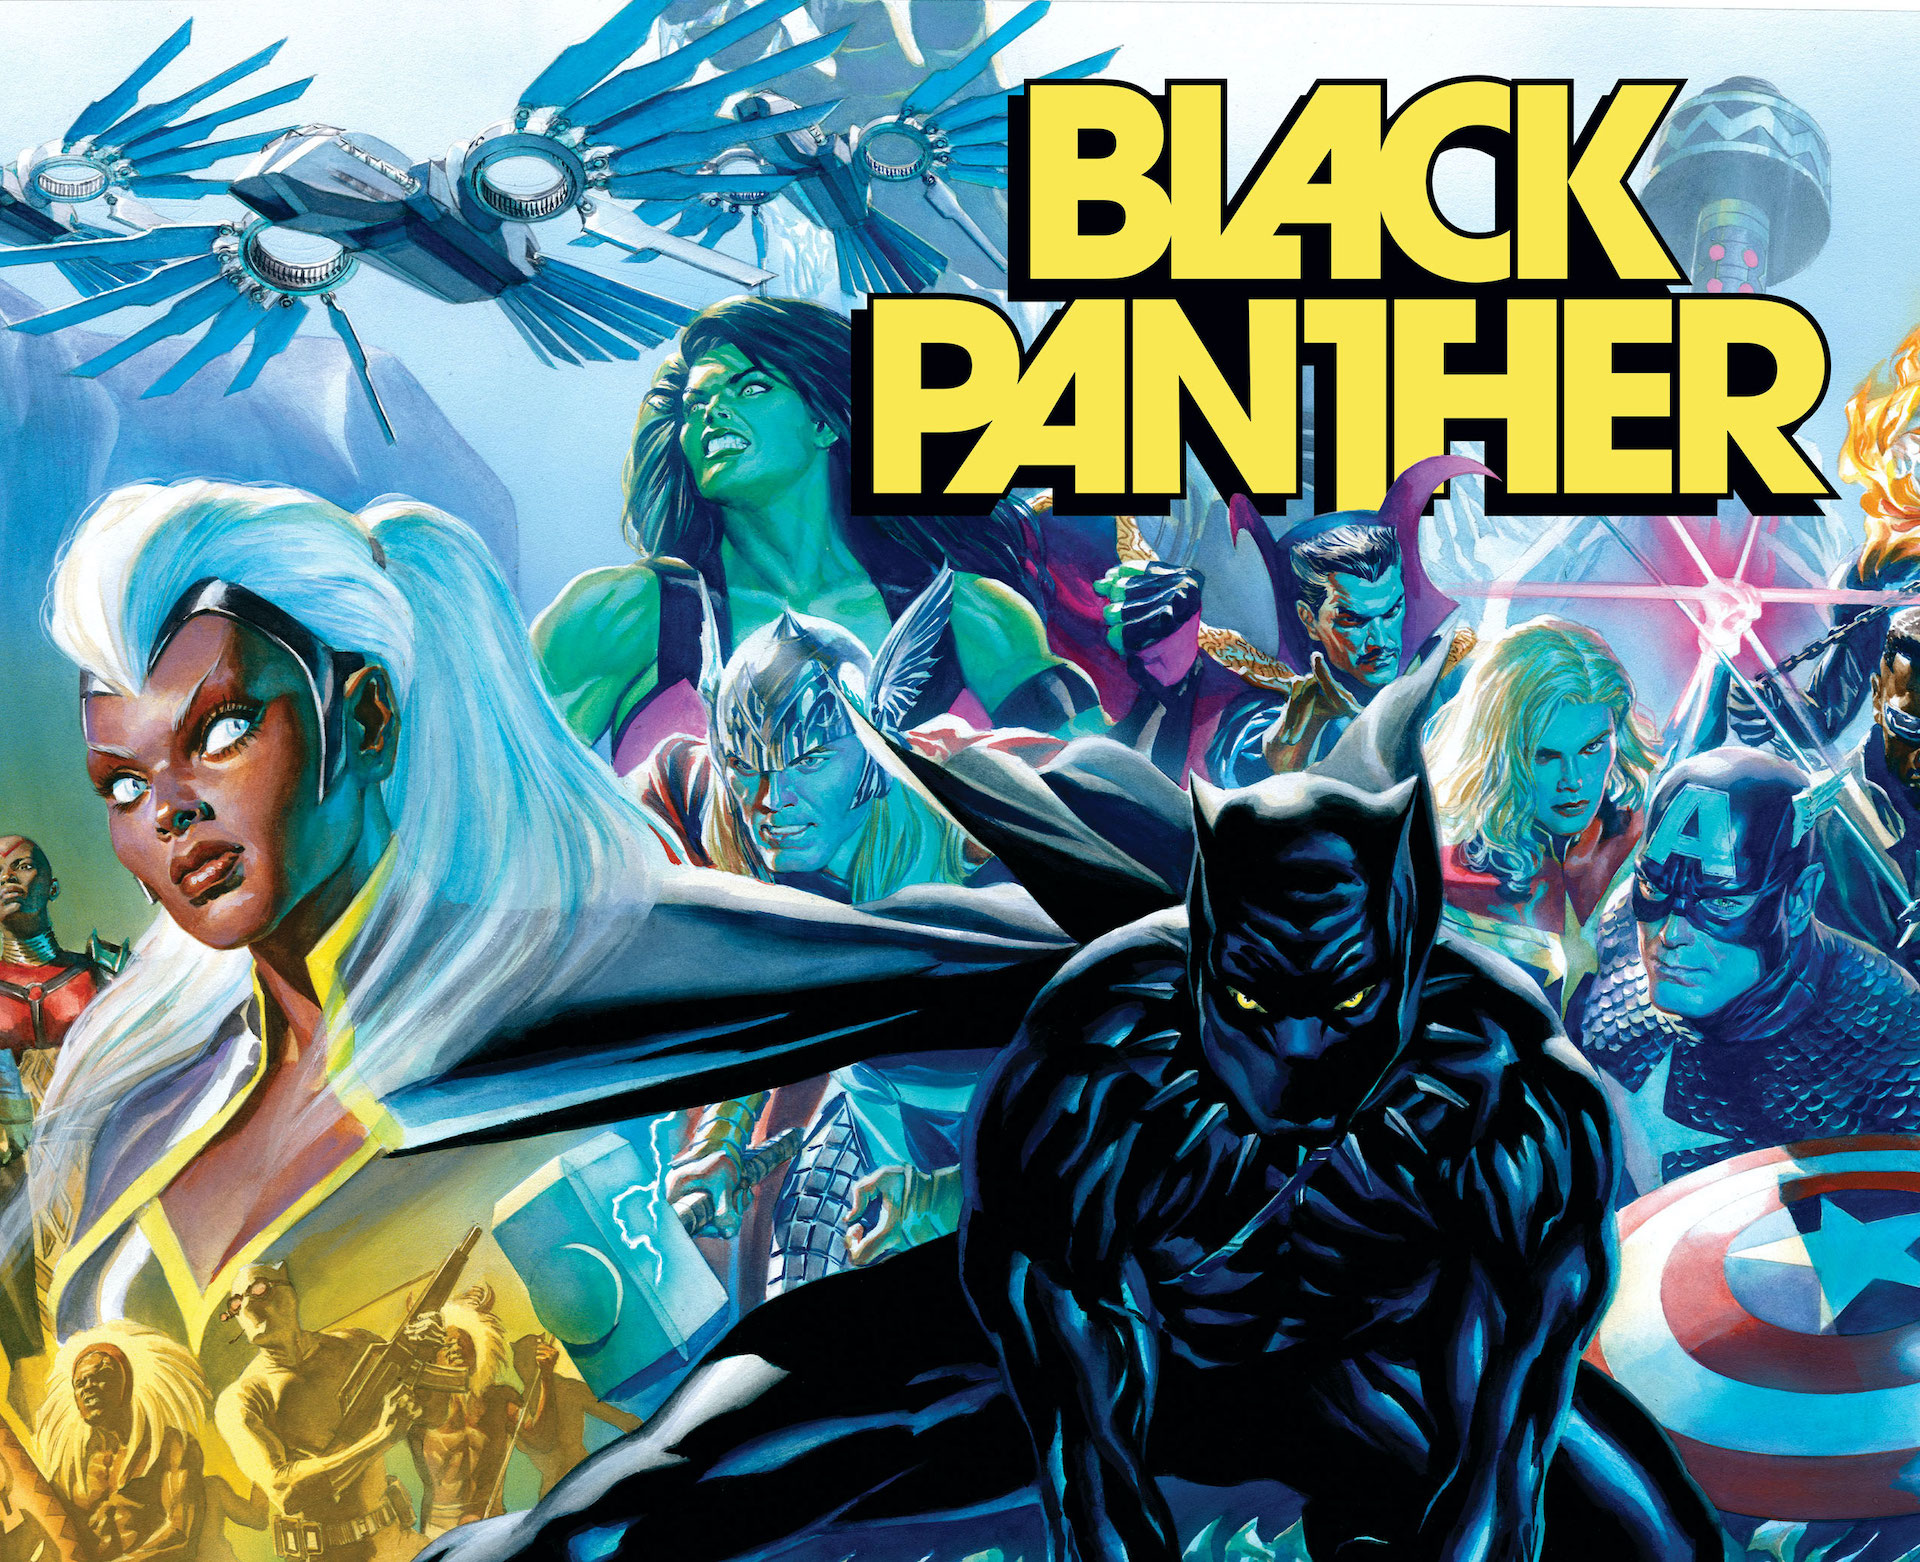 Marvel Comics taps John Ridley for new 'Black Panther' series launching August 2021